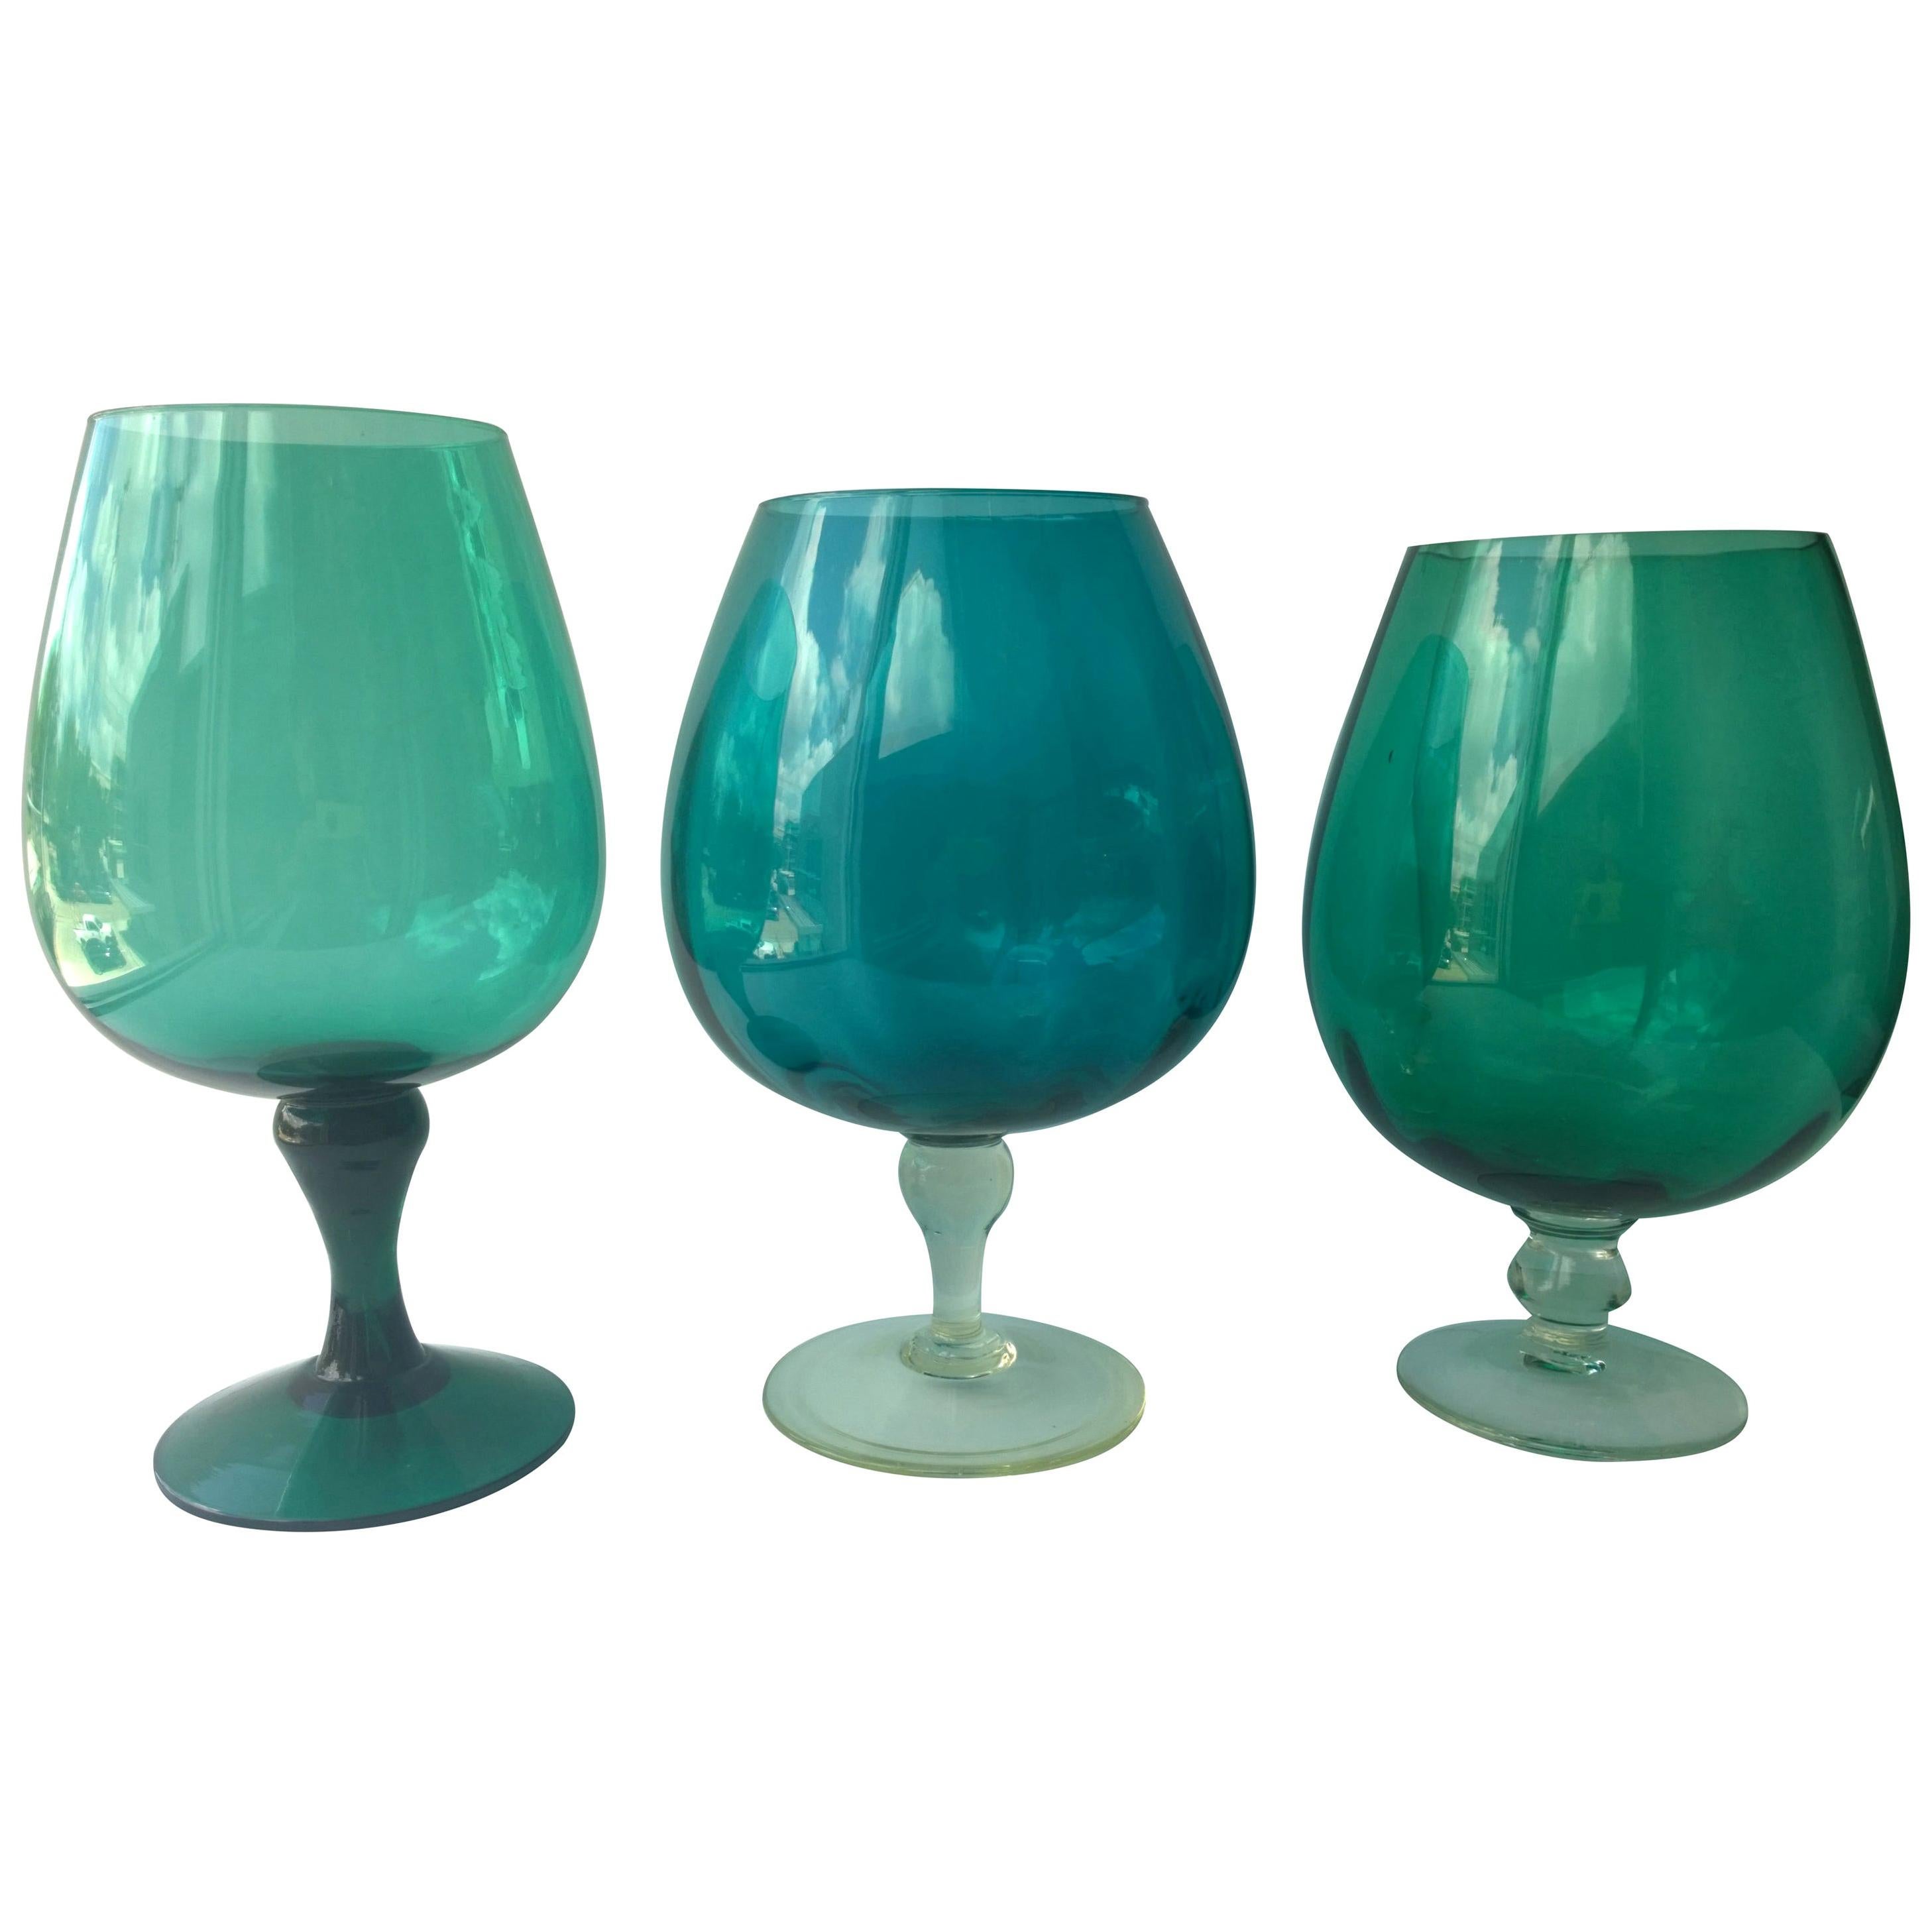 3 Hand Blown Multi-Green or Blue Hues Large Blown Glass Brandy Snifters or Vases For Sale